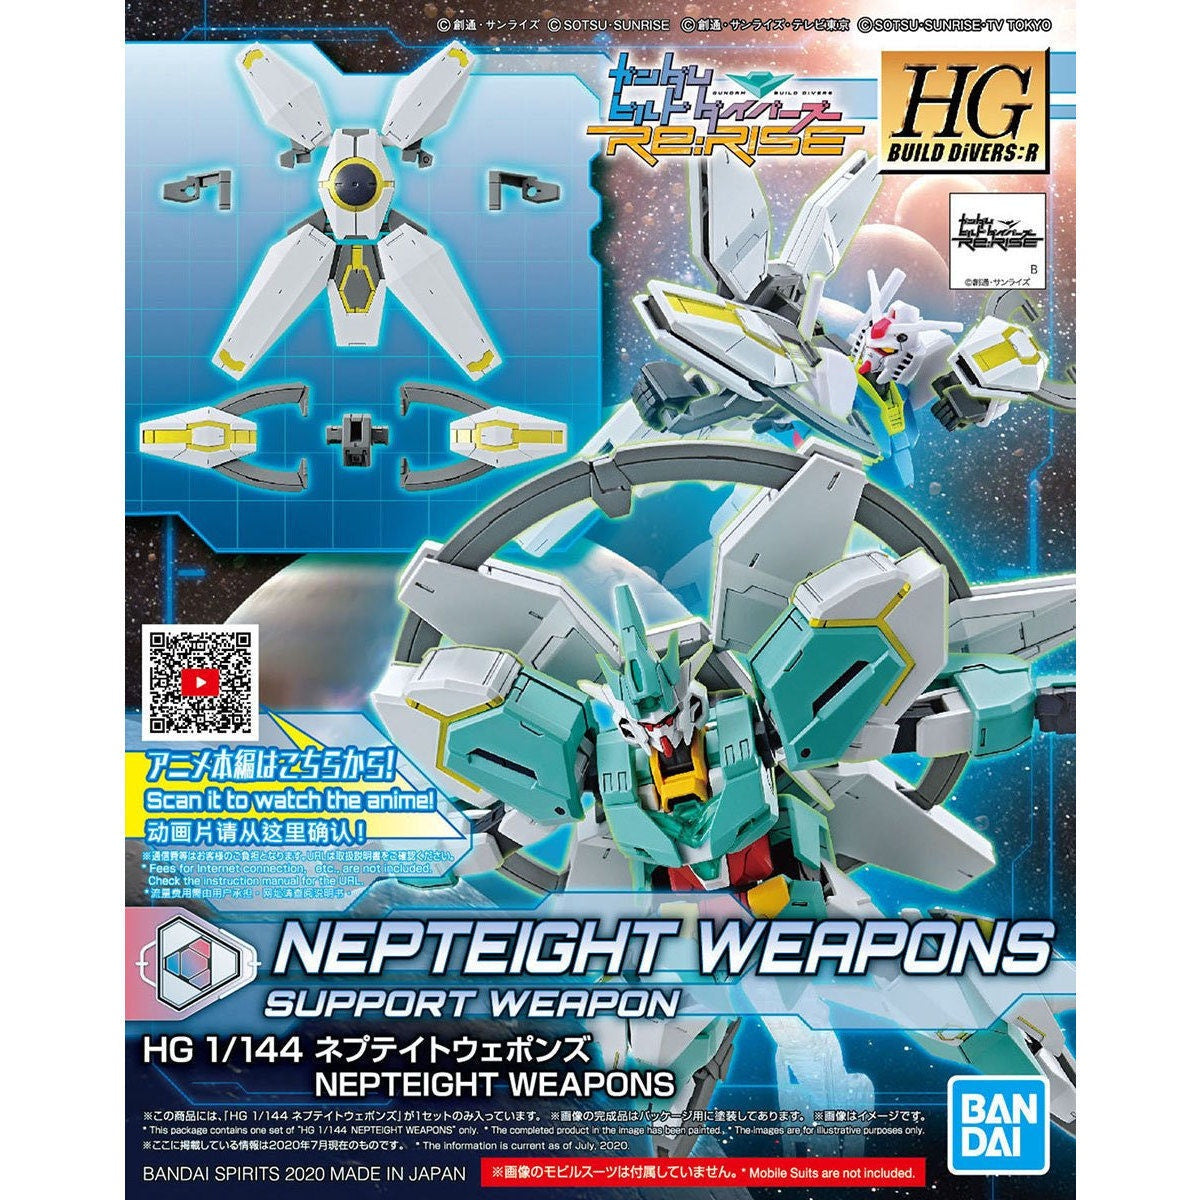 Hg 1/144 Nepteight Weapons